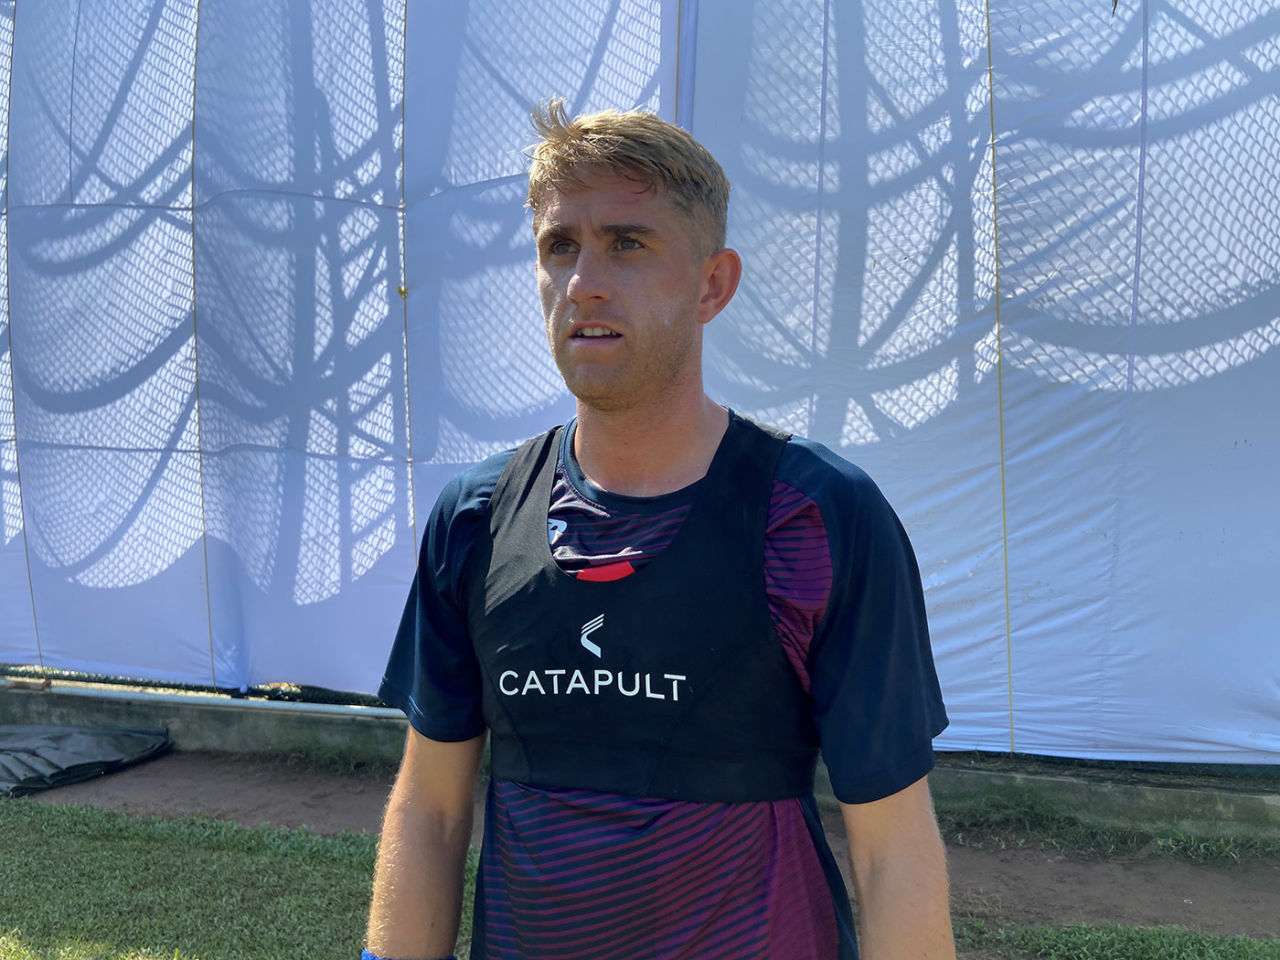 Olly Stone during training ahead of the 2nd Test vs Sri Lanka, Galle, 20 January 2021